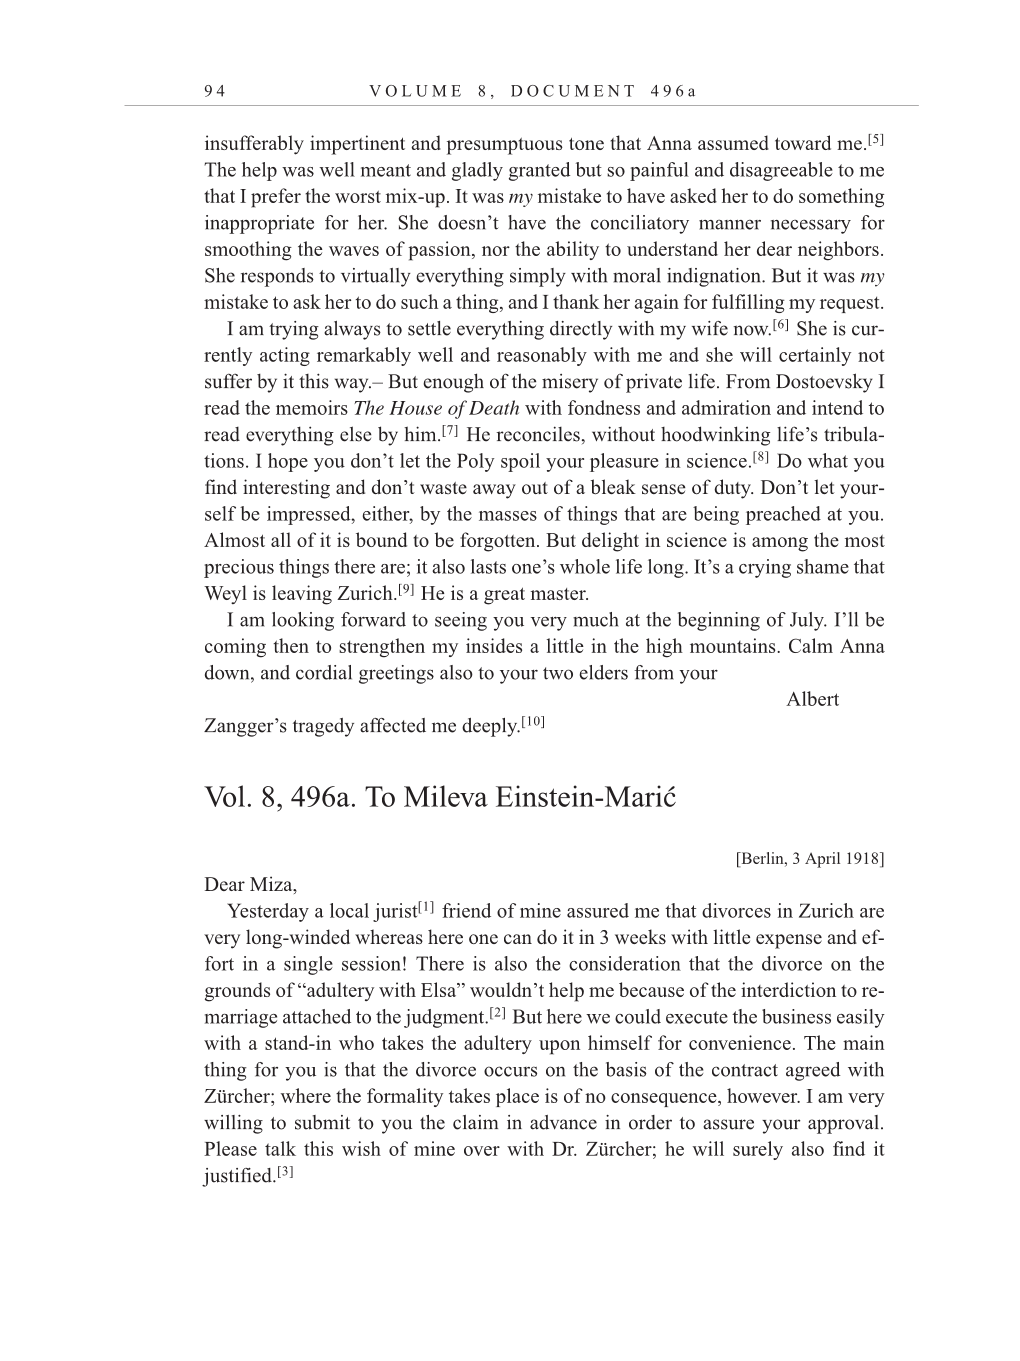 Volume 10: The Berlin Years: Correspondence, May-December 1920, and Supplementary Correspondence, 1909-1920 (English translation supplement) page 94